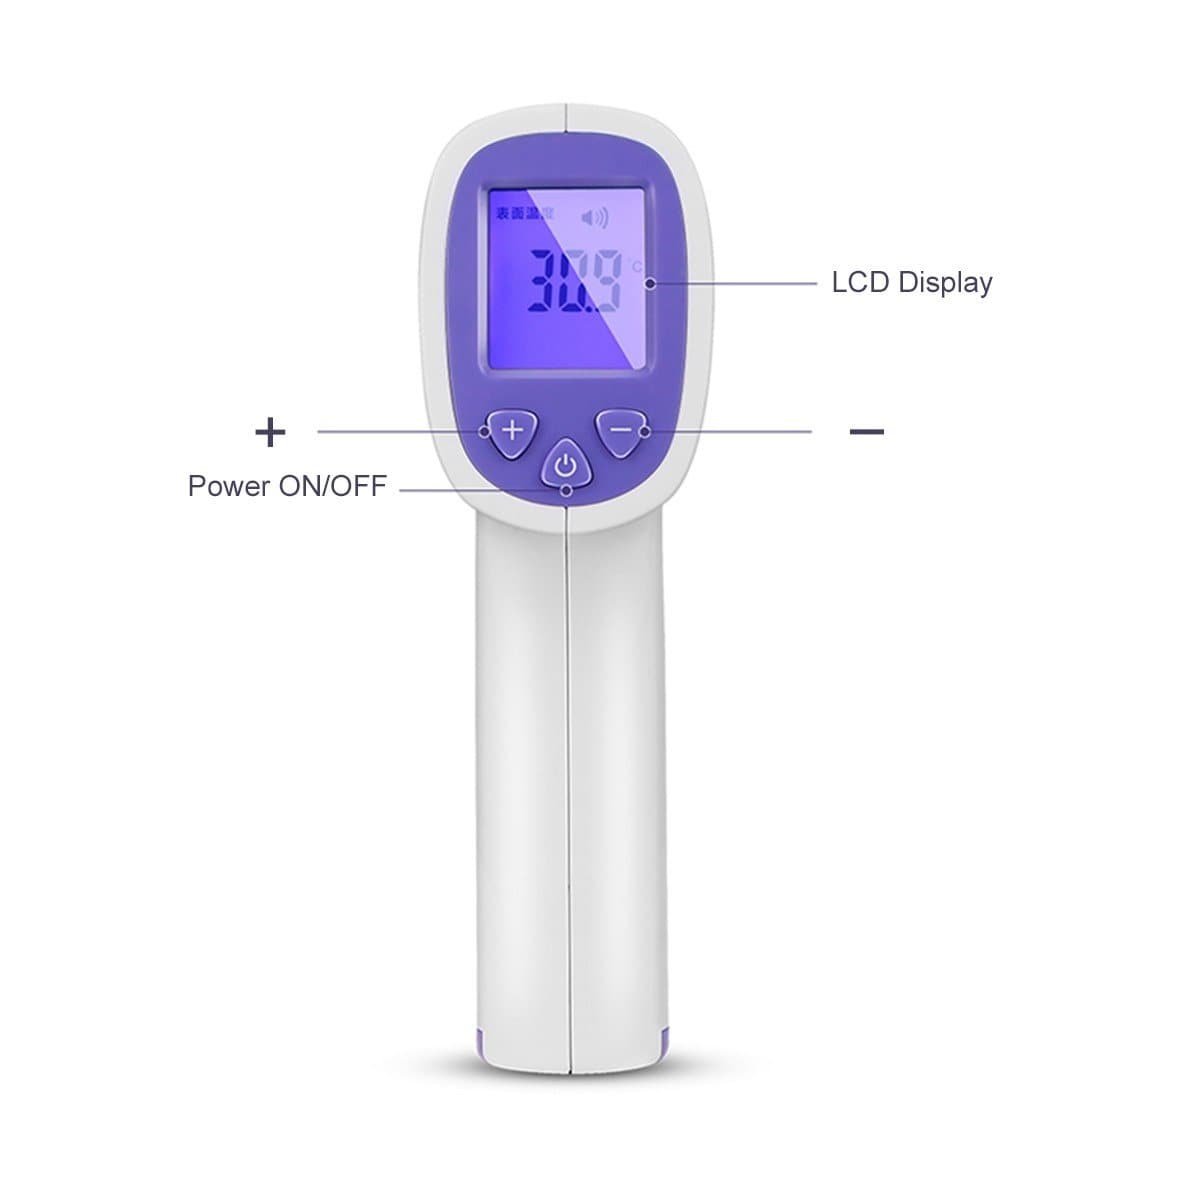 No Touch Infrared Digital Forehead/Surface Thermometer  - 1 Second Response Time - Senior.com Infrared Thermometers